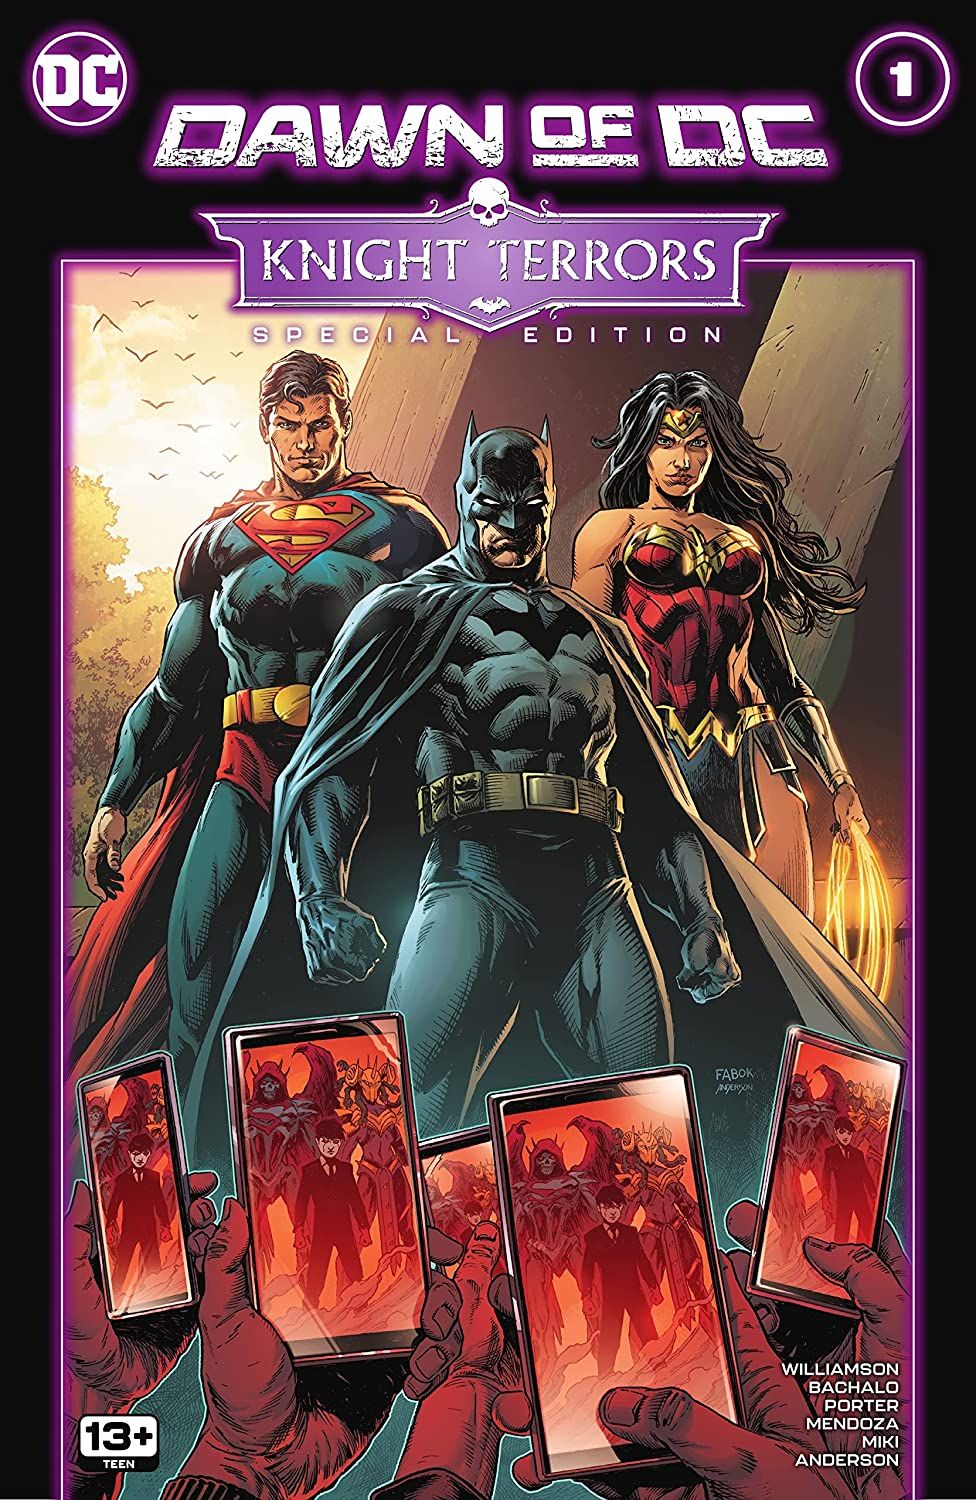 Dawn of DC Knight Terrors Free Comic Book Day Special Edition Cover